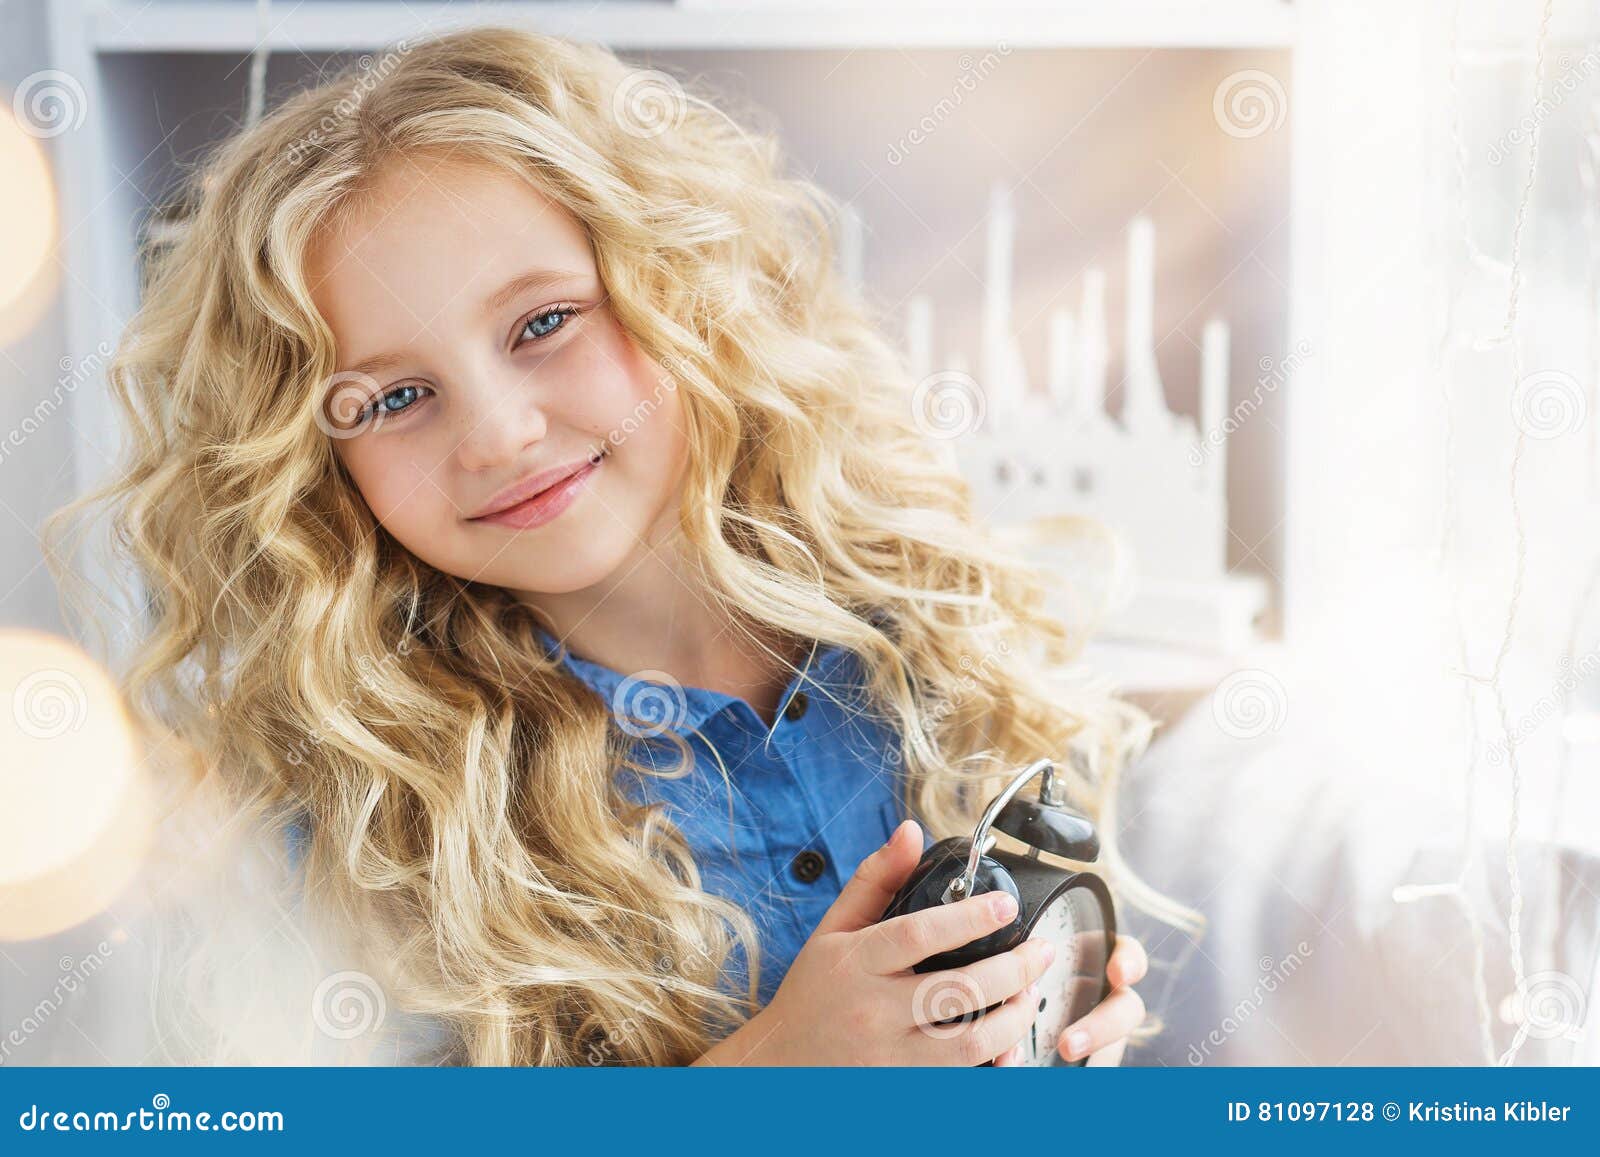 portrait-of-smiling-pretty-little-girl-with-a-clock-at-hands-near-the